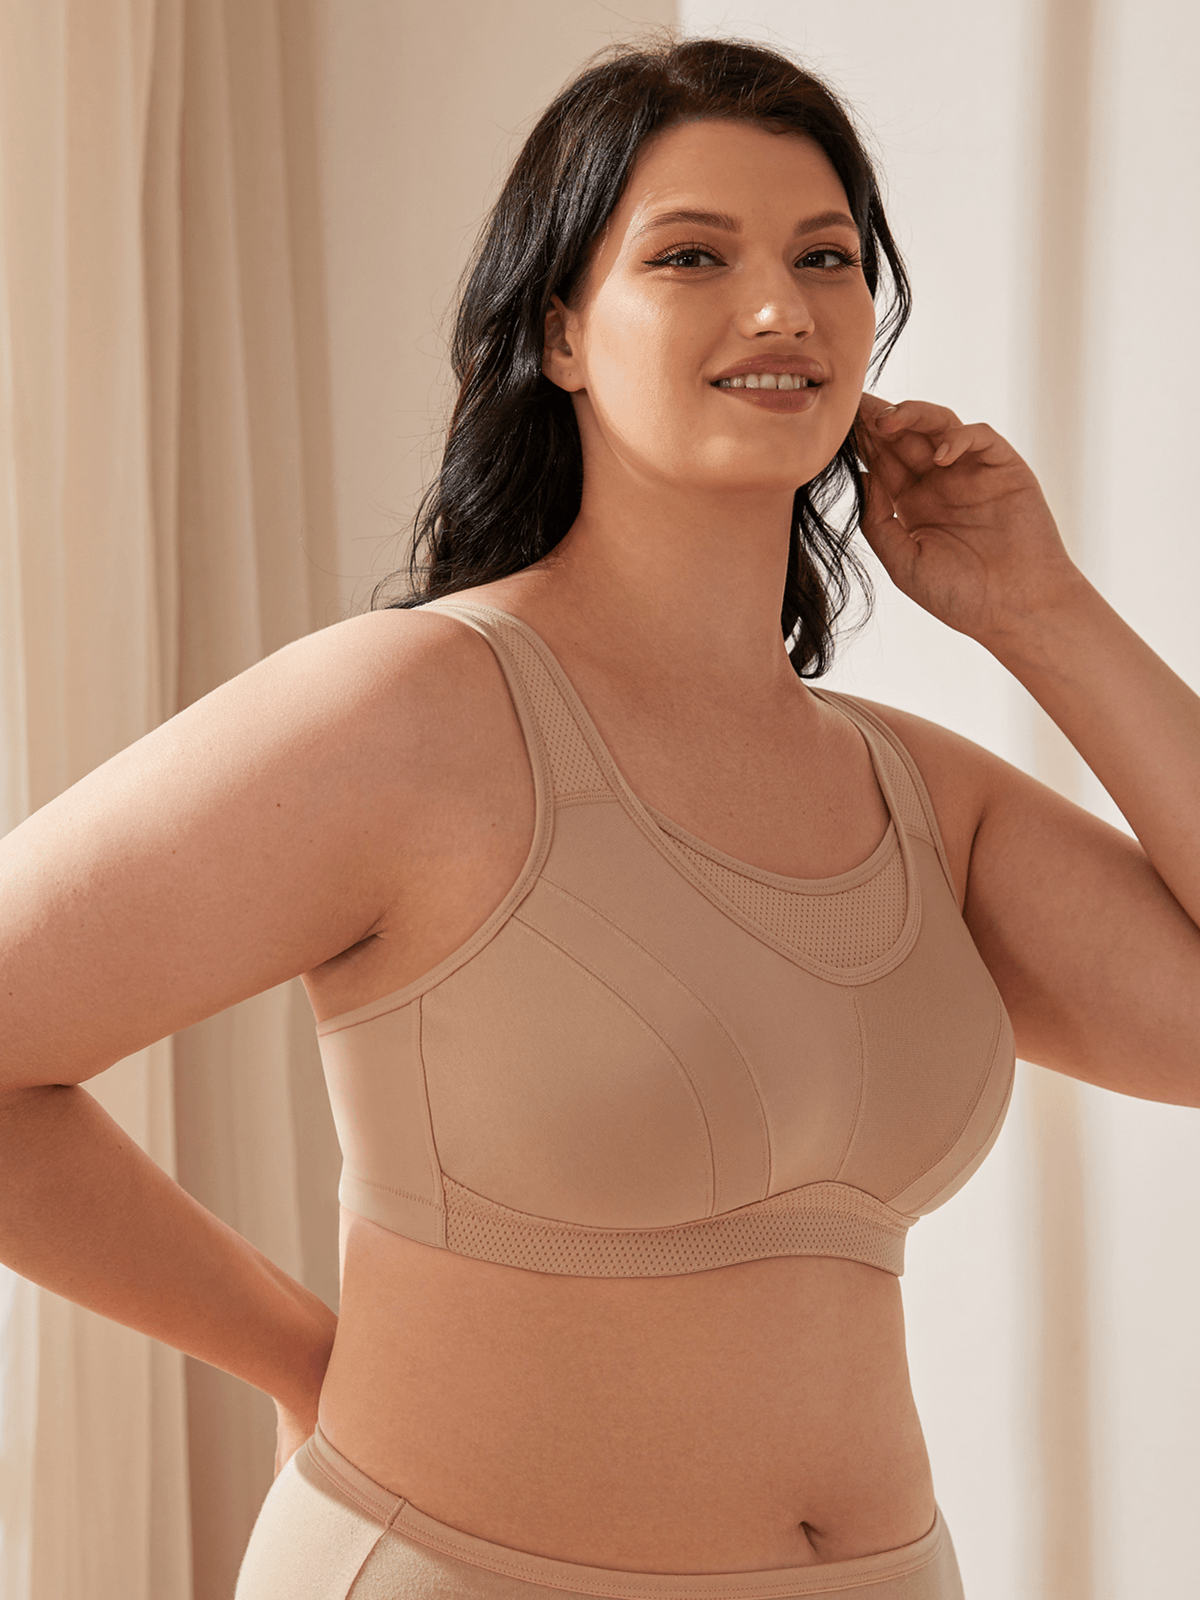 Women's High Impact Comfort Full Support Non Padded Bra Wirefree